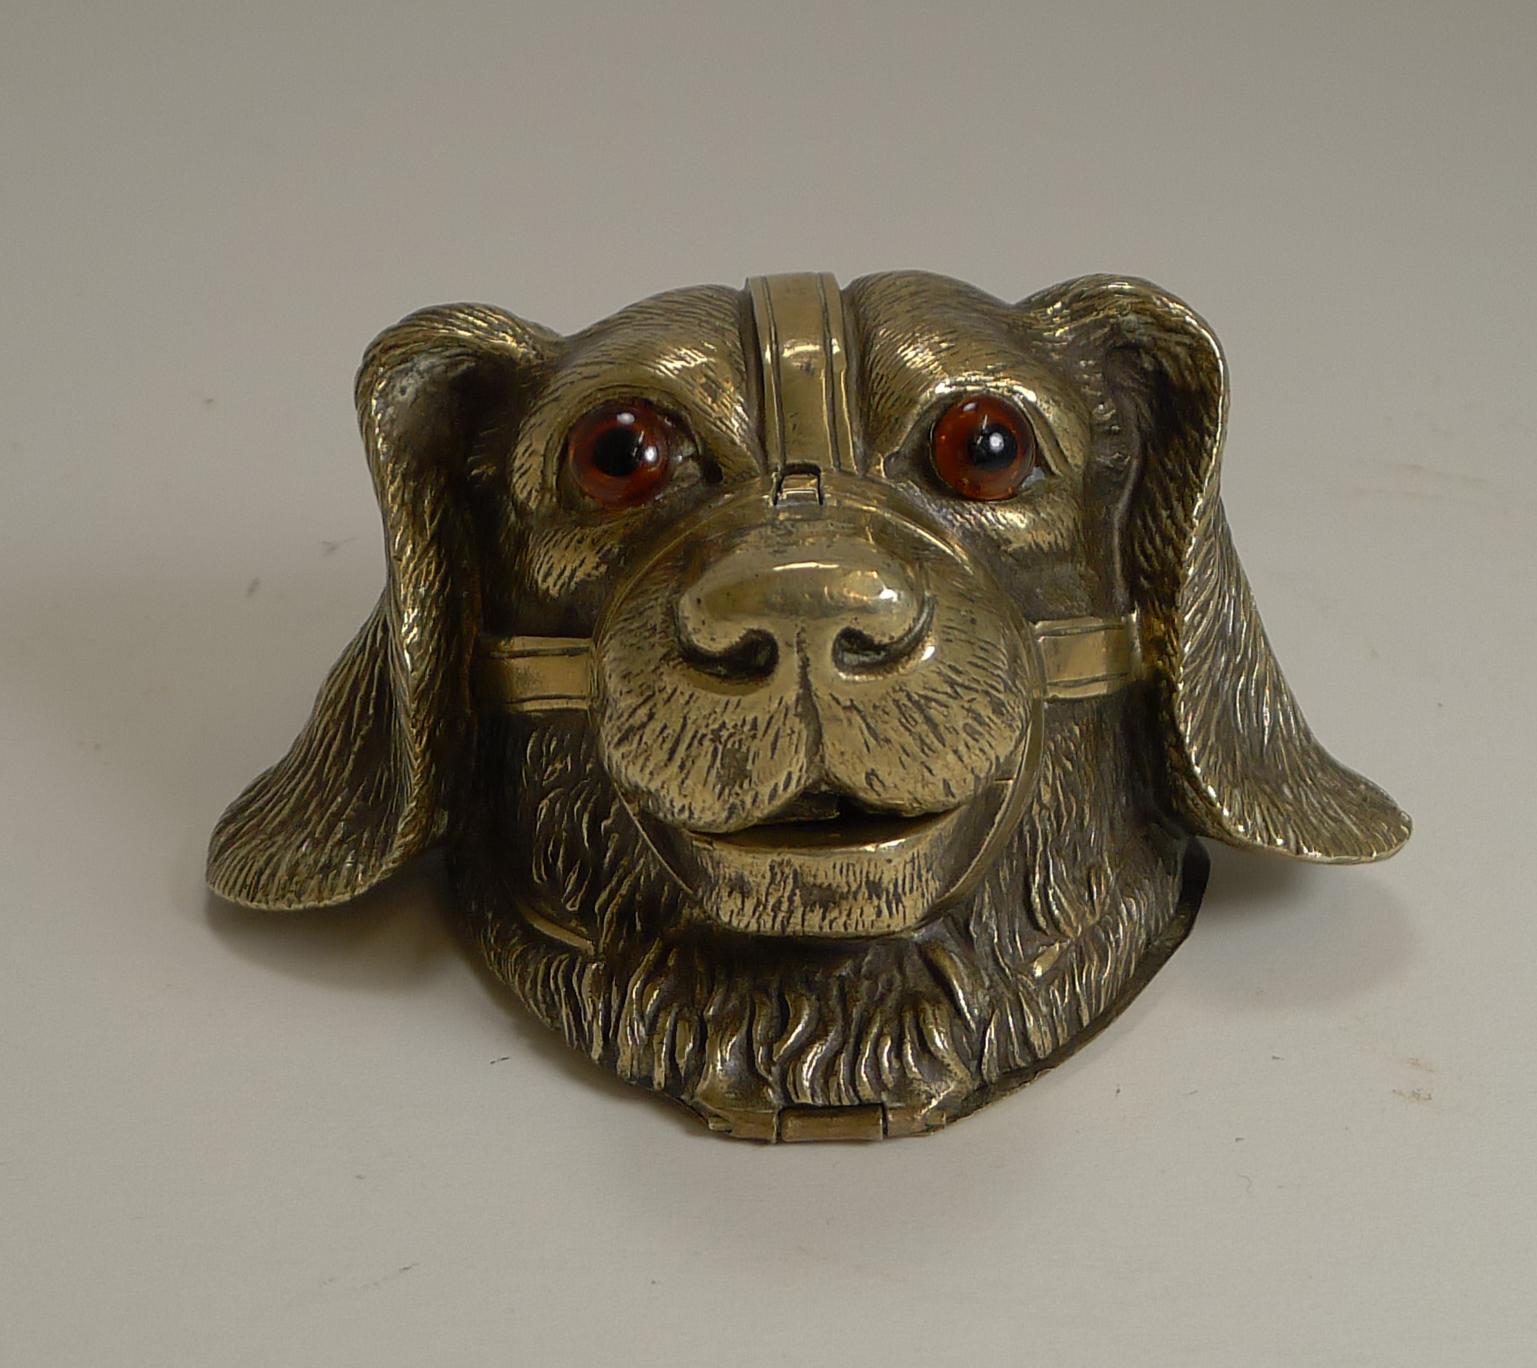 A really charming antique figural inkwell cast in brass with wonderful detail and sporting his two glass eyes.

It's a rather unusual configuration with the nose lifting to reveal the specially shaped glass ink chamber. This is accessed from the